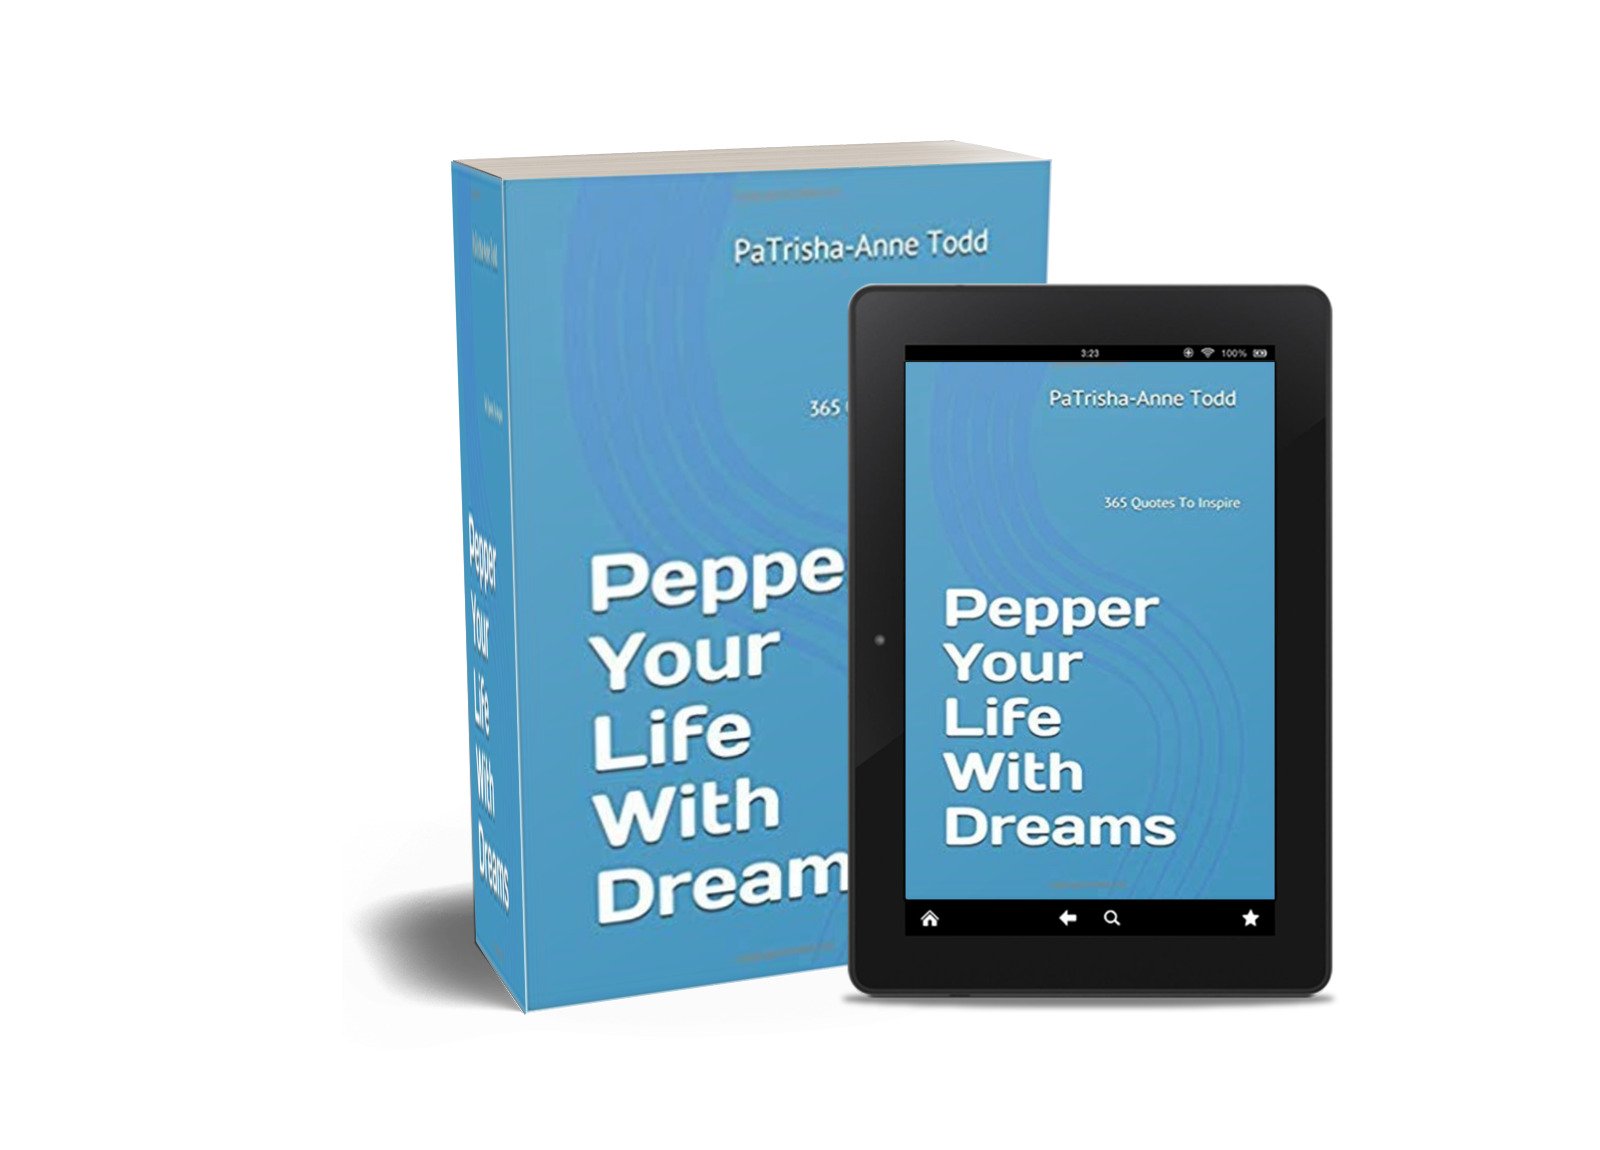 Pepper Your Life with Dreams written by PaTrisha-Anne Todd